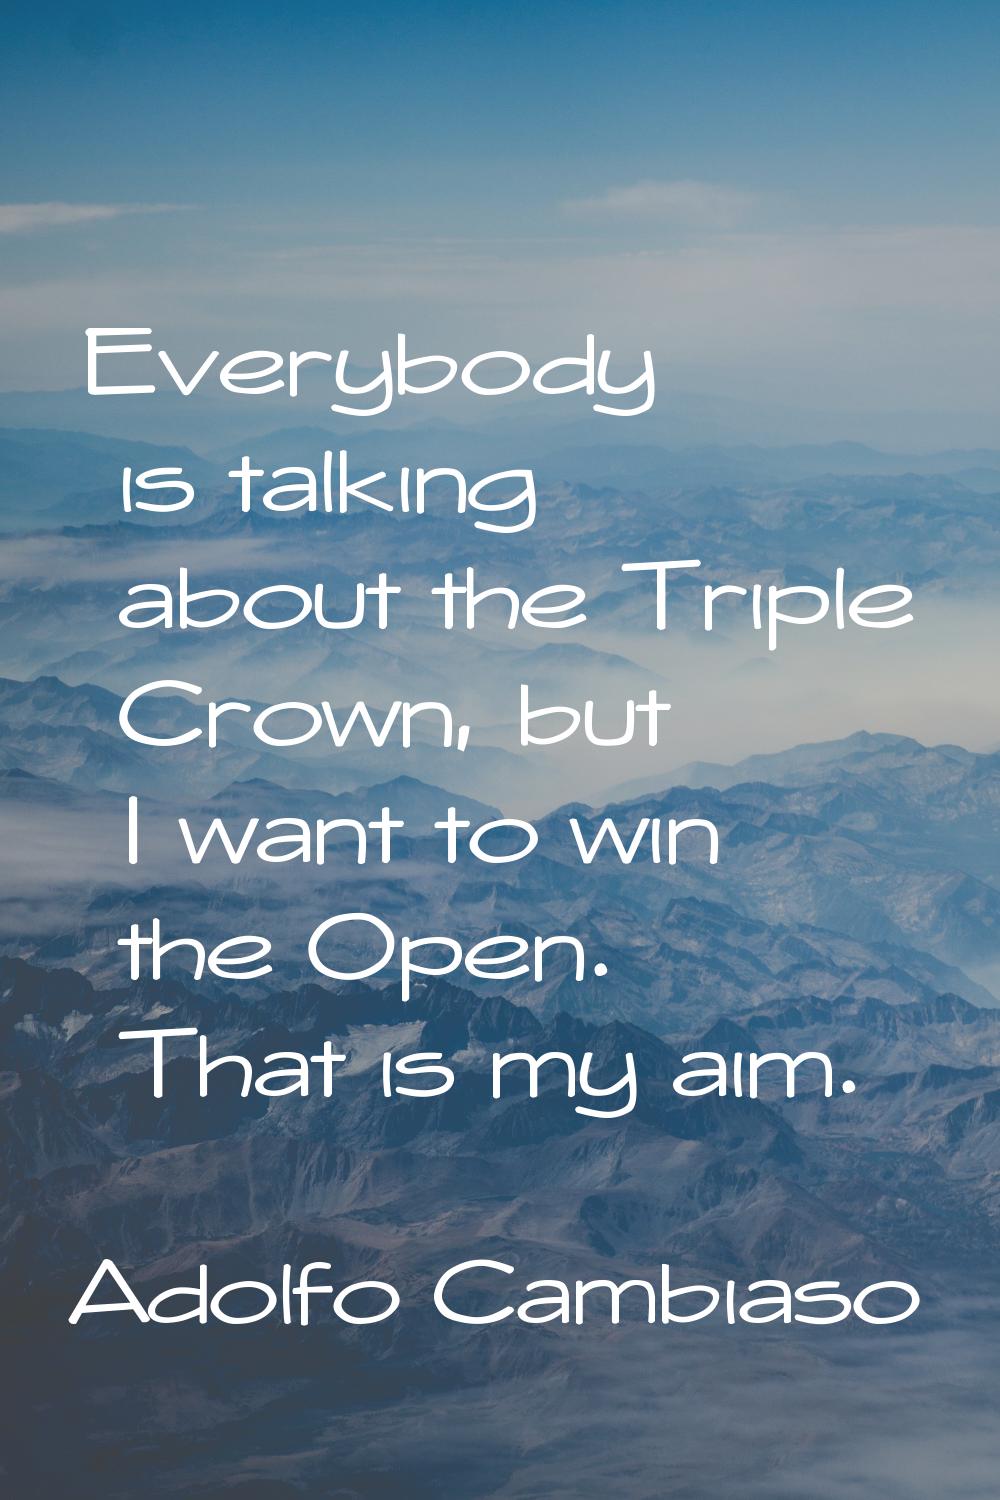 Everybody is talking about the Triple Crown, but I want to win the Open. That is my aim.